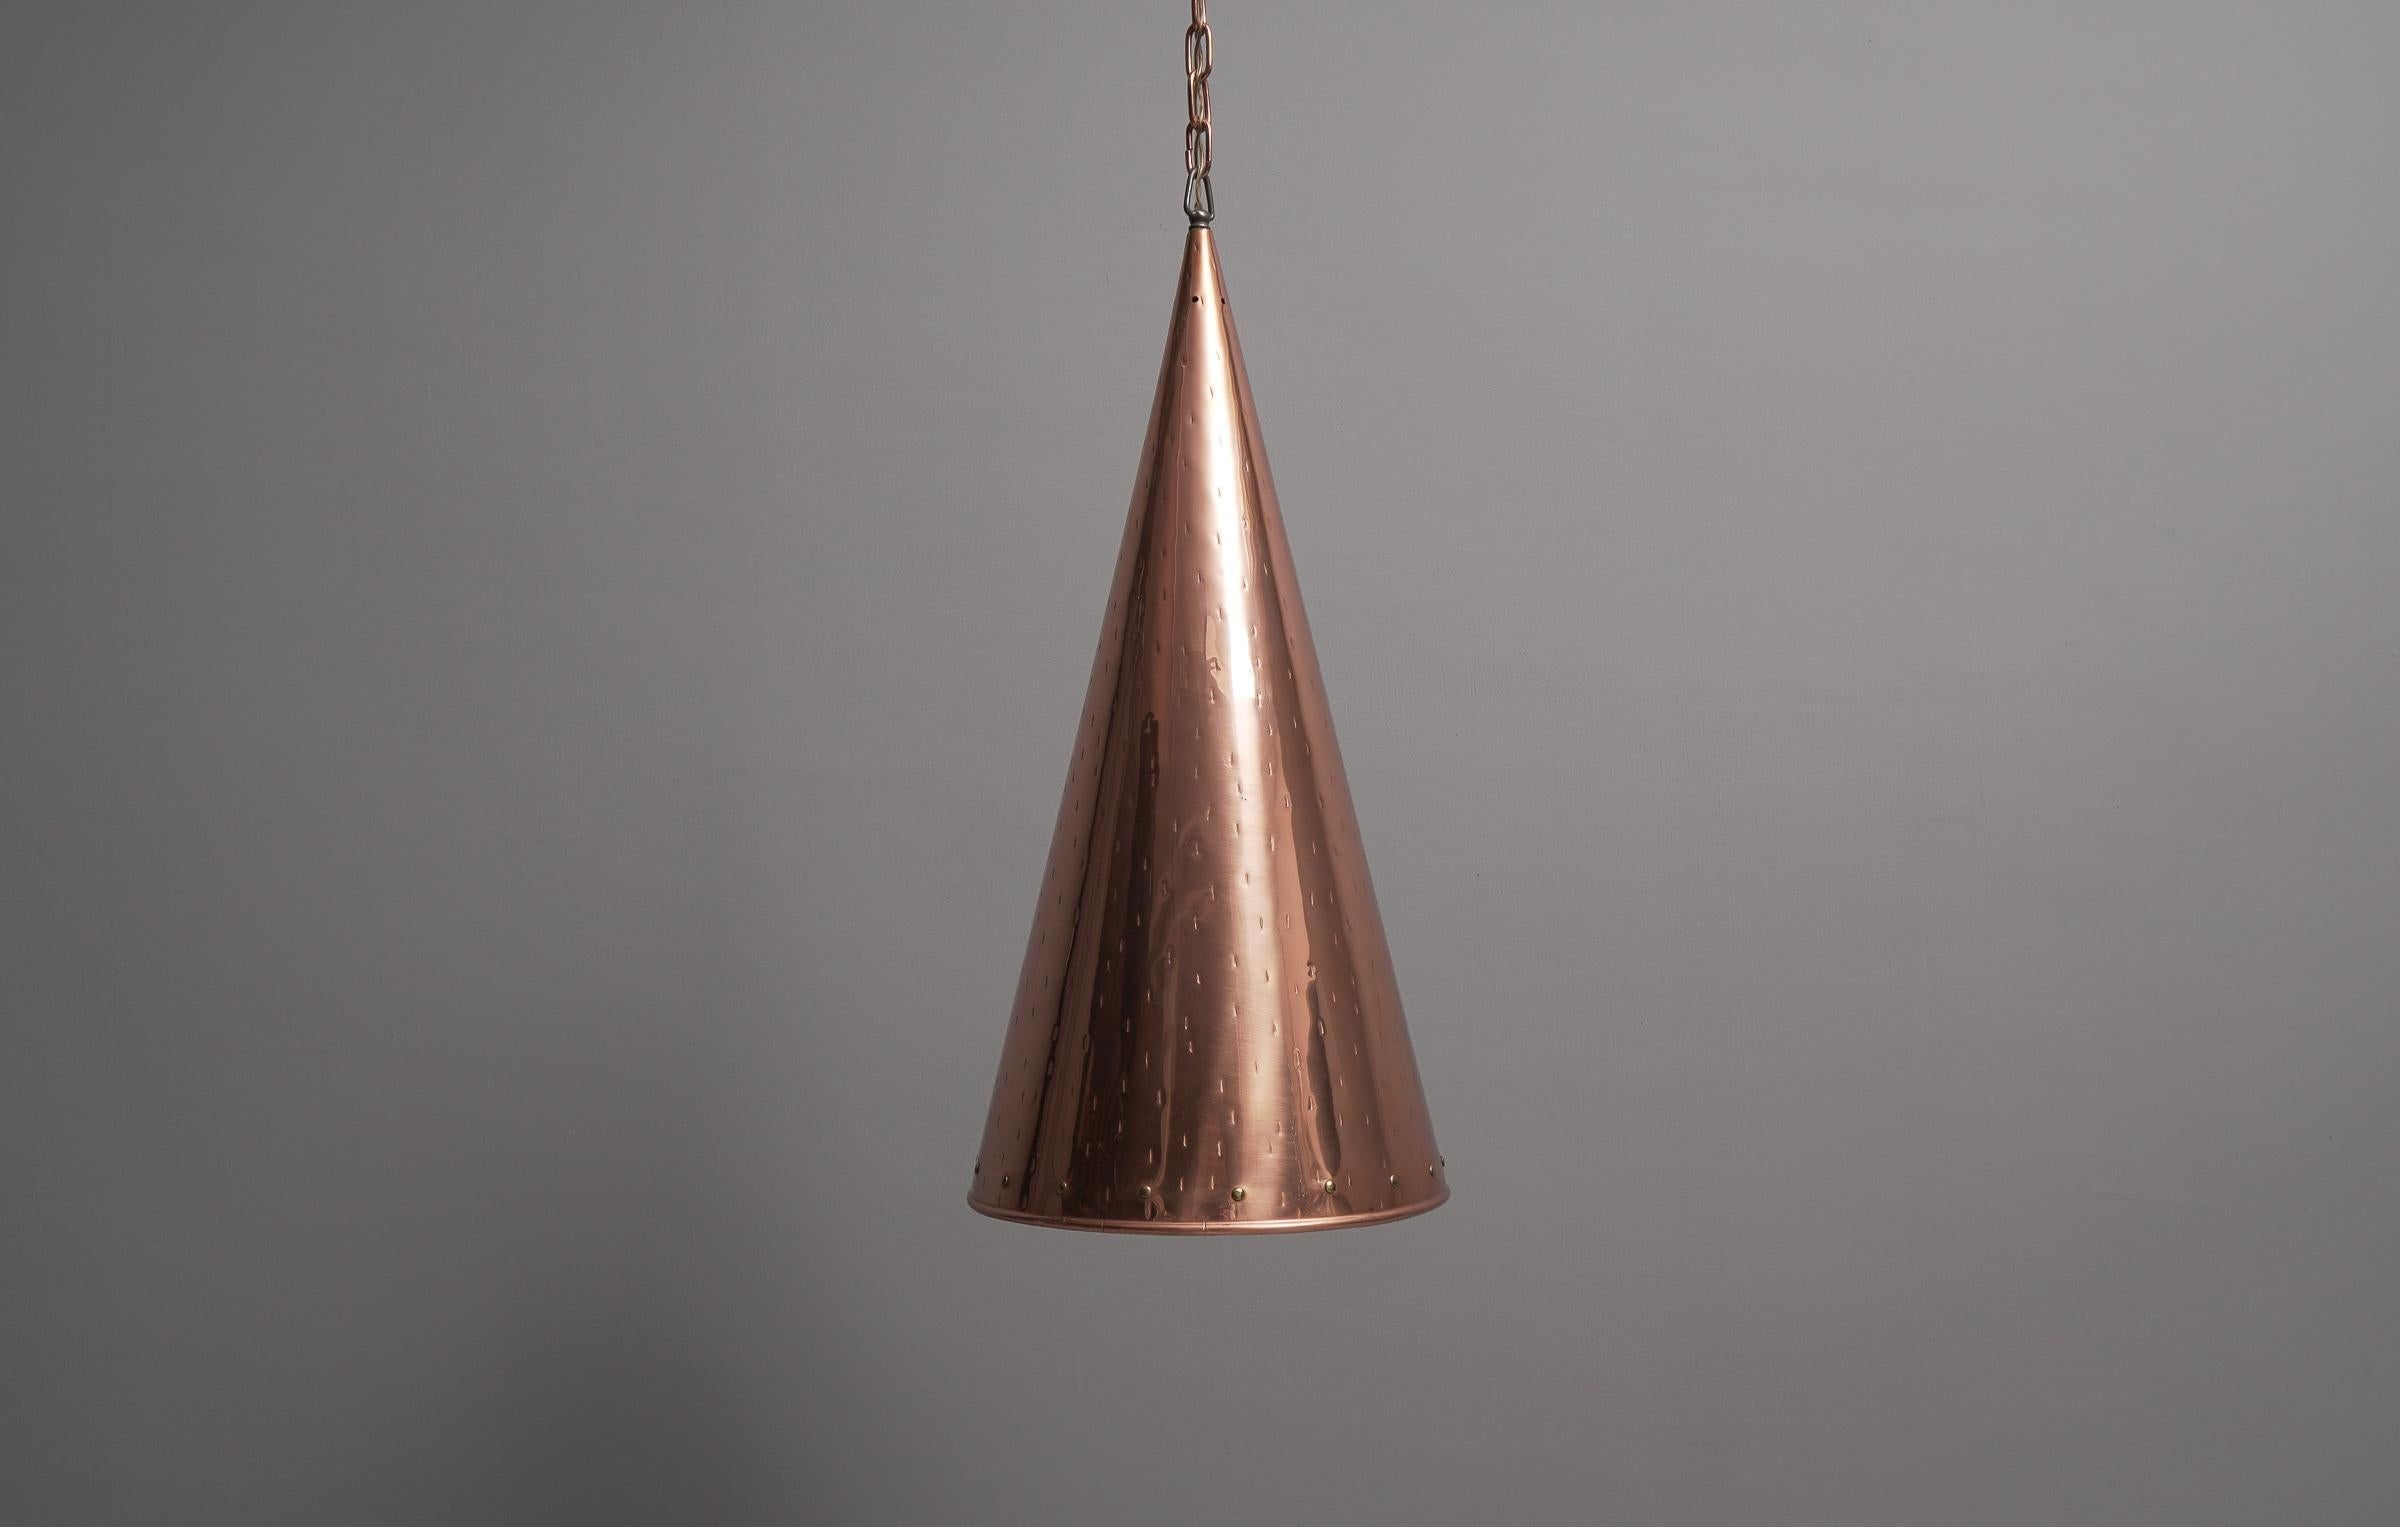 Hammered Copper Cone Pendant Lamps by E.S Horn Aalestrup, 1950s Denmark In Good Condition For Sale In Nürnberg, Bayern